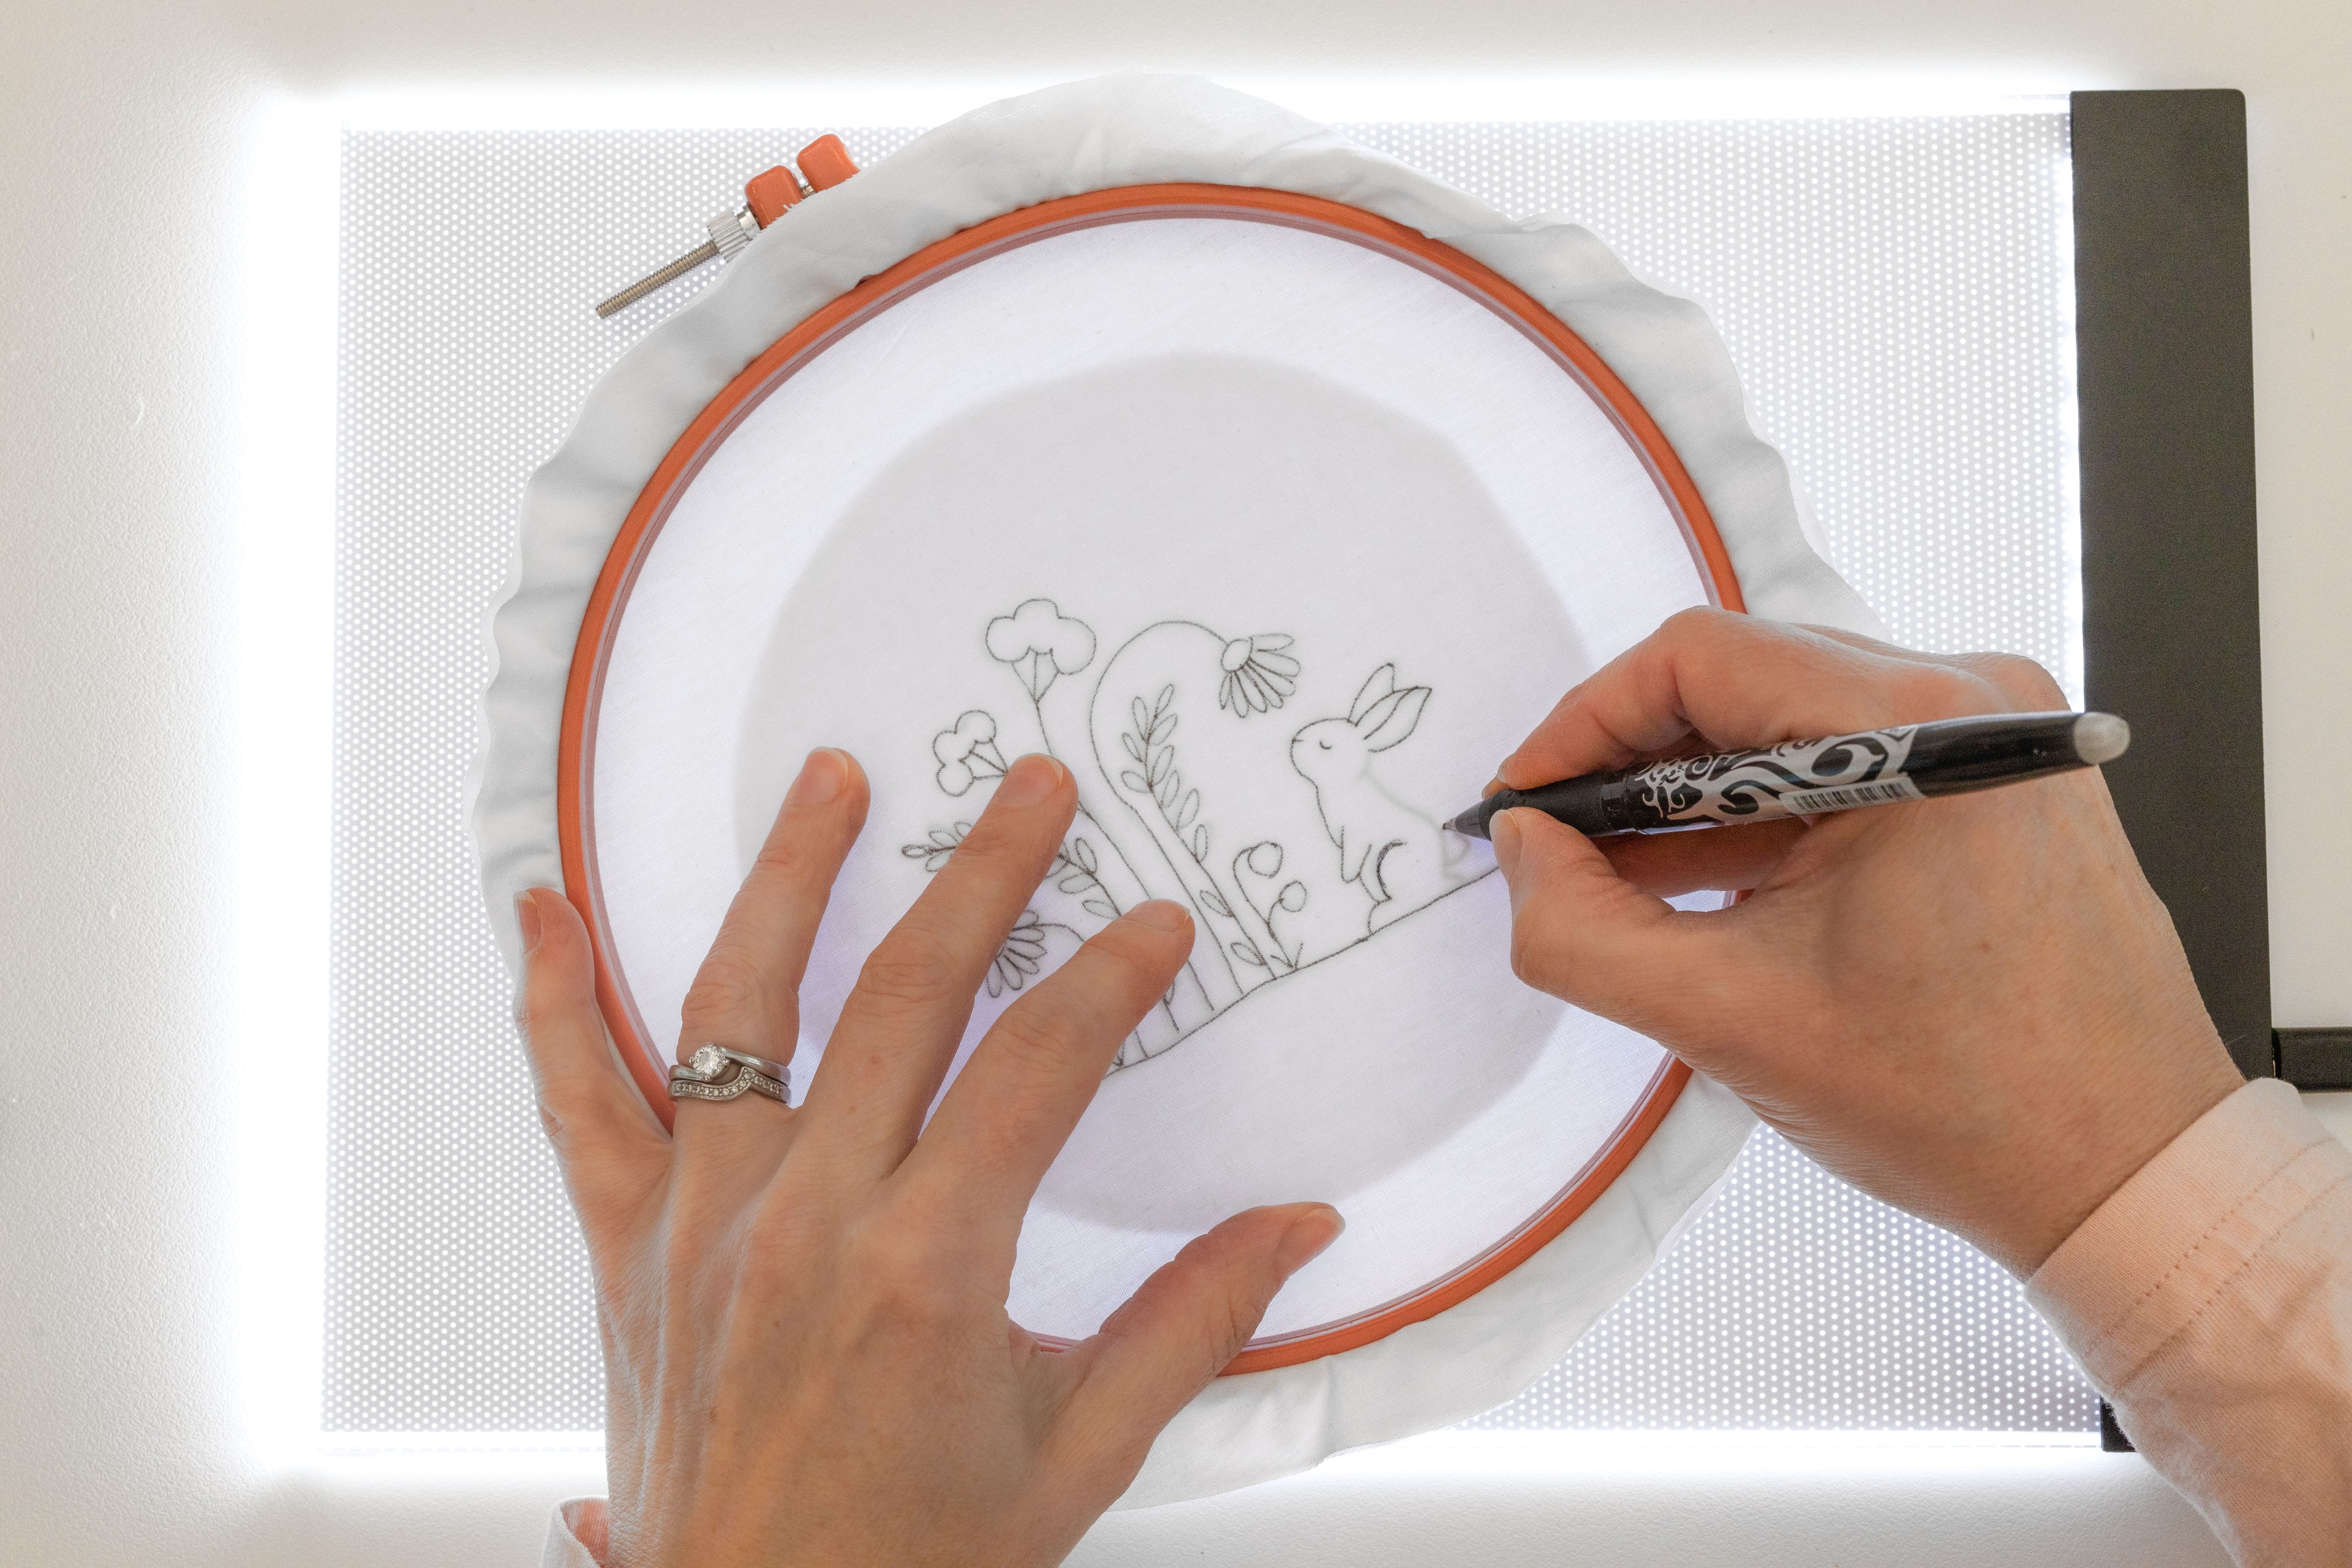 This is an image of a hand drawing a design onto a hoop.